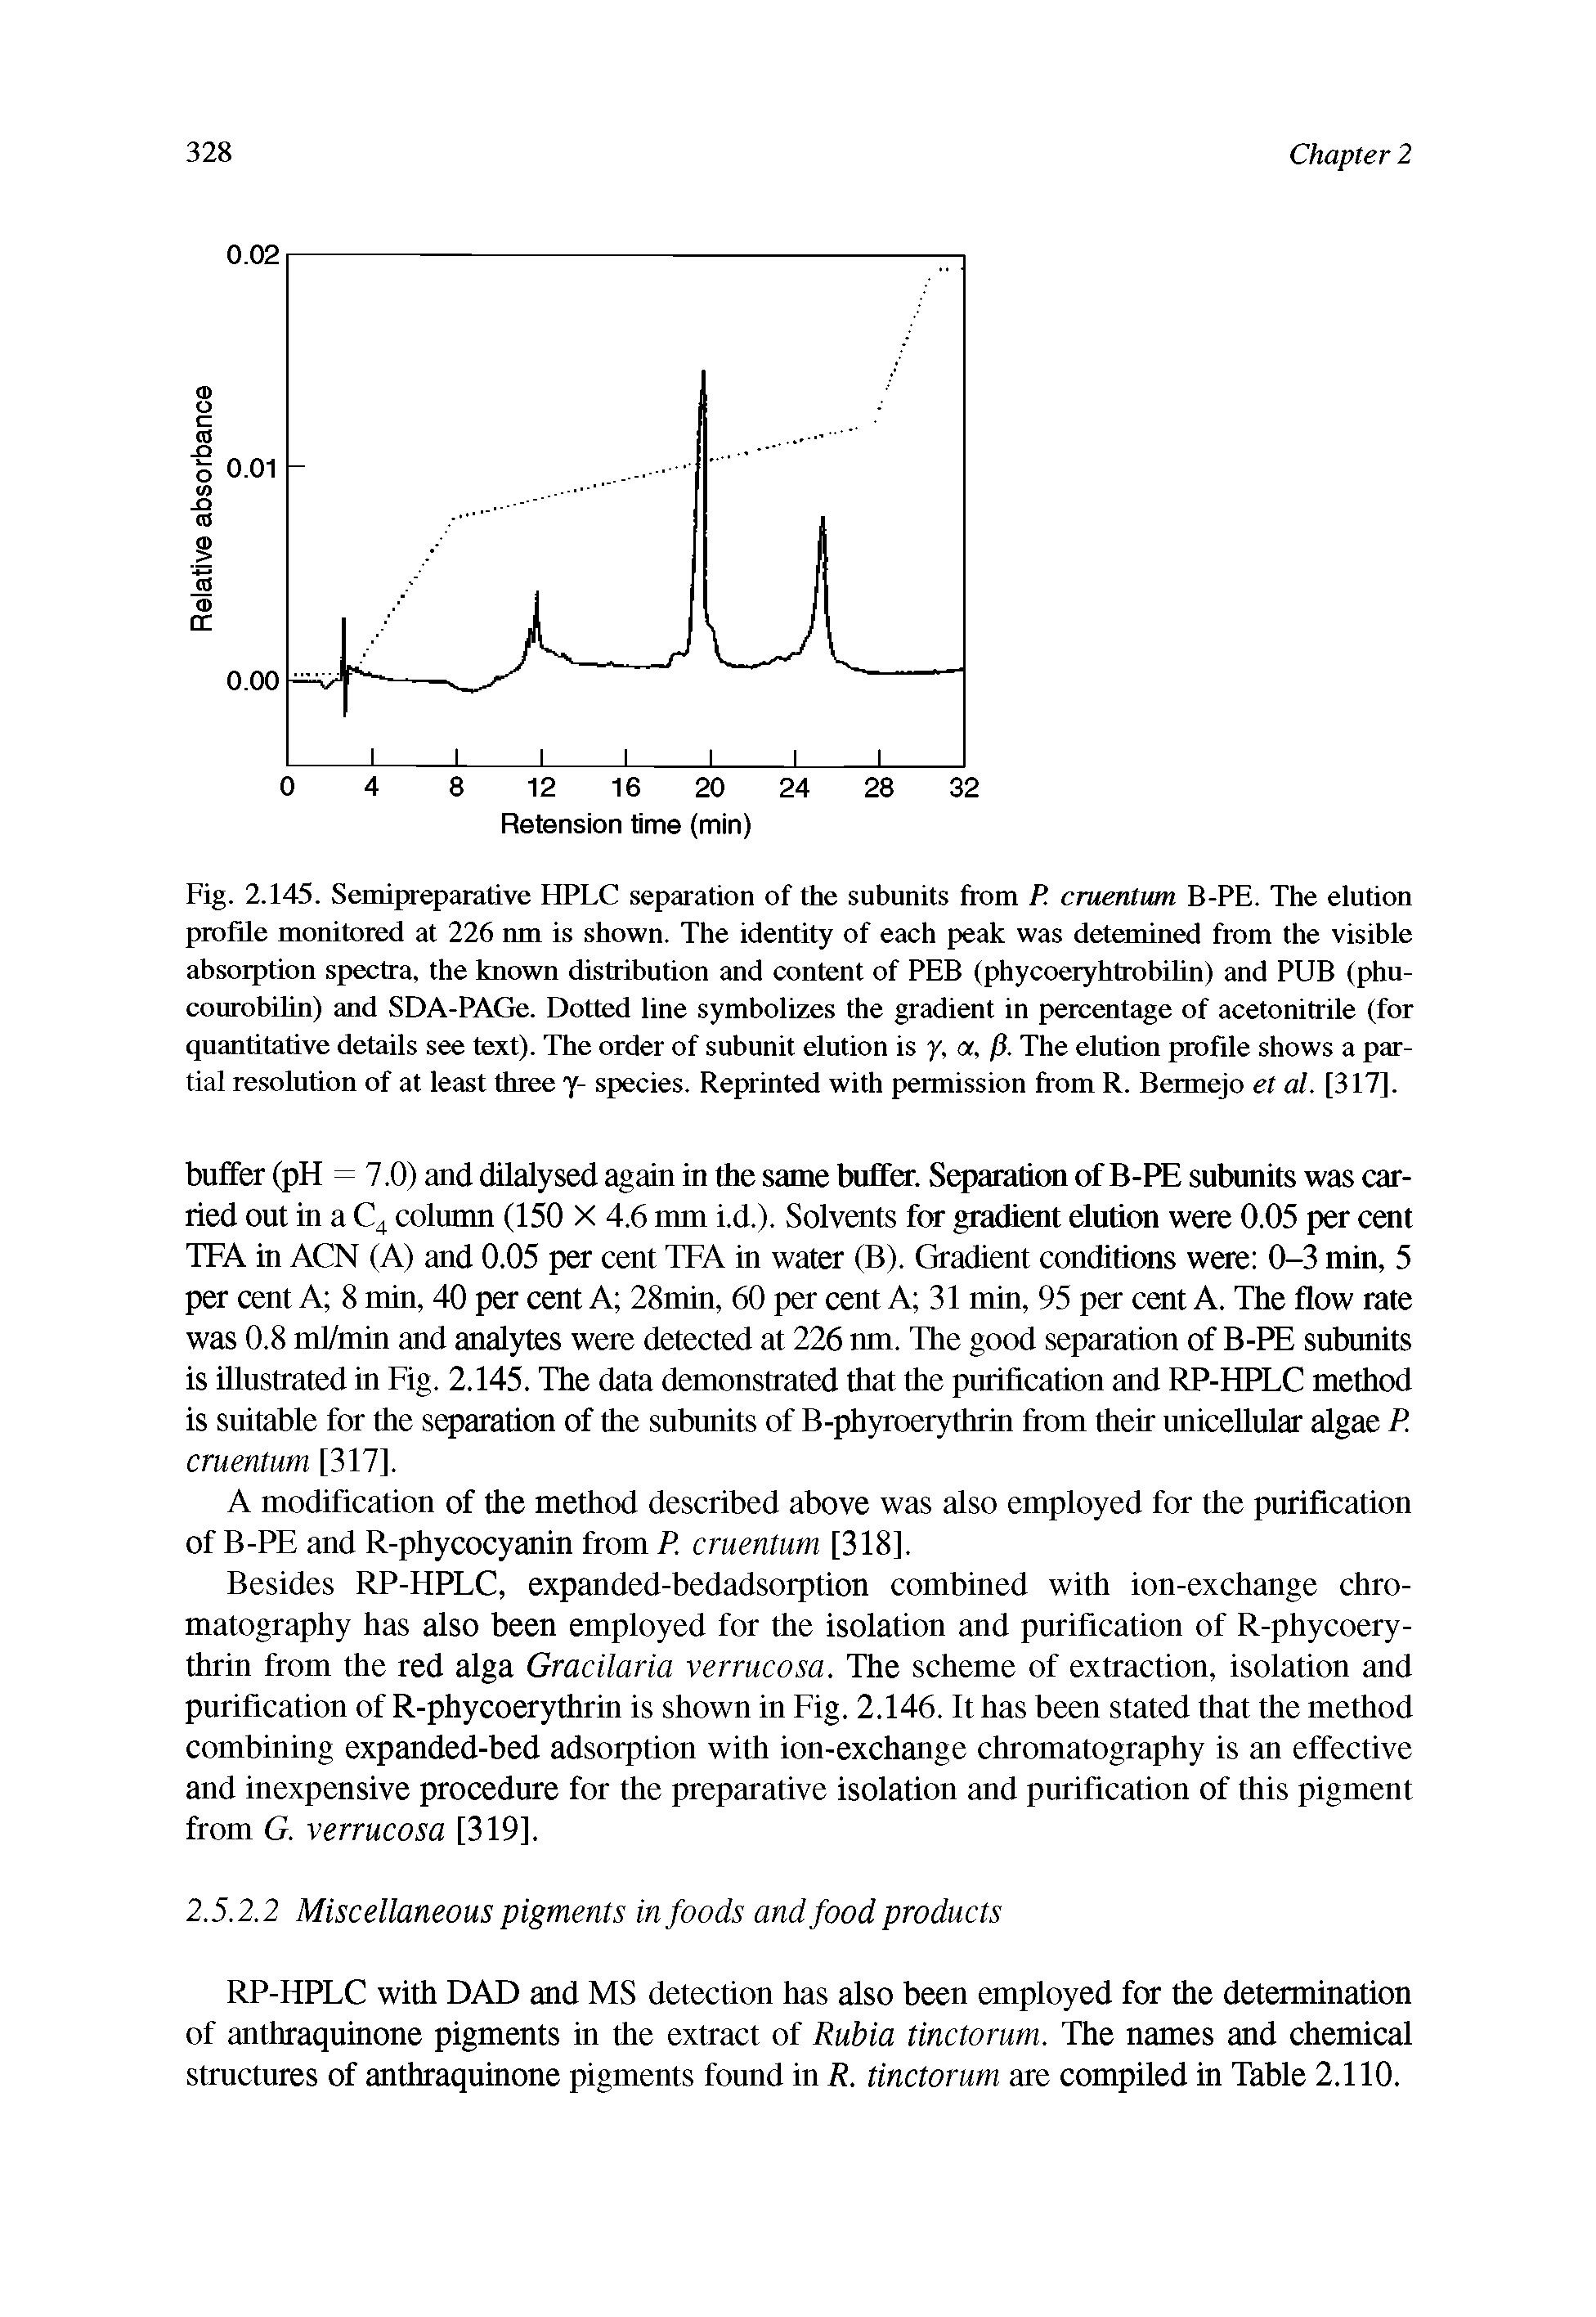 Fig. 2.145. Semipreparative HPLC separation of the subunits from P. cruentum B-PE. The elution profile monitored at 226 nm is shown. The identity of each peak was detemined from the visible absorption spectra, the known distribution and content of PEB (phycoeryhtrobihn) and PUB (phu-courobihn) and SDA-PAGe. Dotted line symbolizes the gradient in percentage of acetonitrile (for quantitative details see text). The order of subunit elution is y. a, p. The elution profile shows a partial resolution of at least three j- species. Reprinted with permission from R. Bermejo et al. [317].